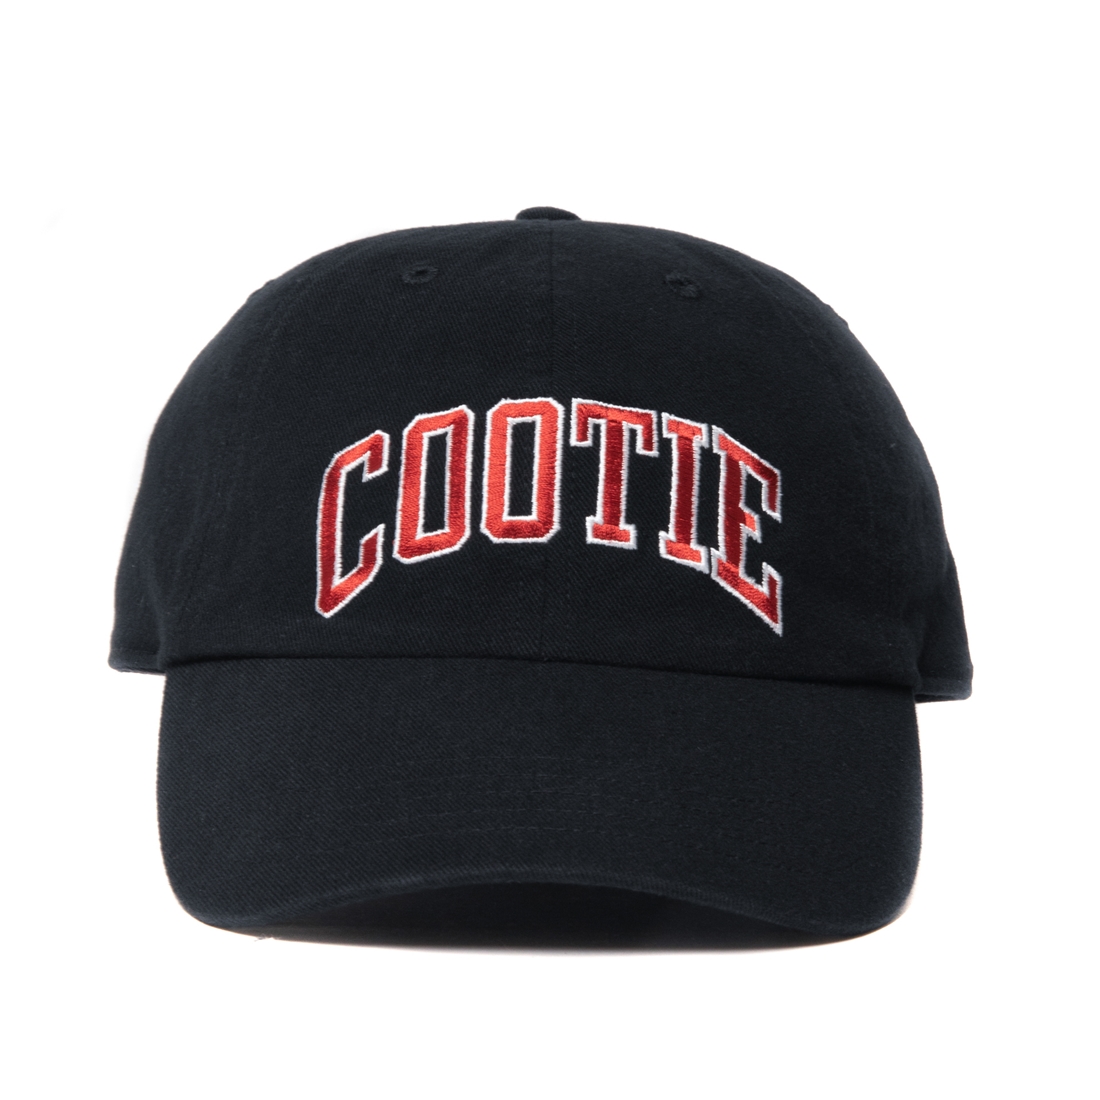 COOTIE PRODUCTIONS/Embroidery 6 Panel Cap（Black）［6パネル 